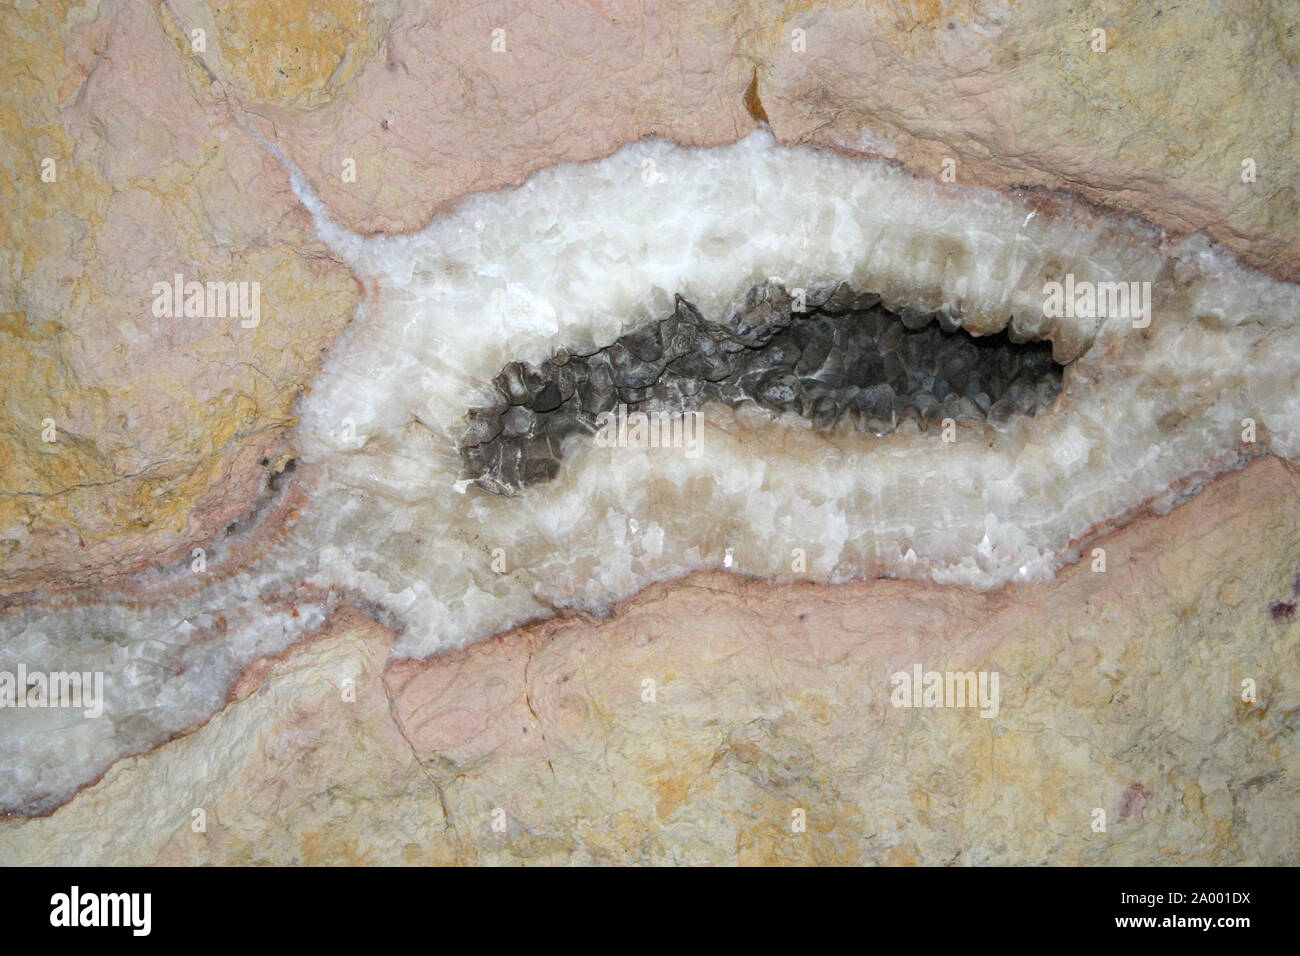 A cluster of beautiful black crystals embedded in a rocky cave wall. Stock Photo